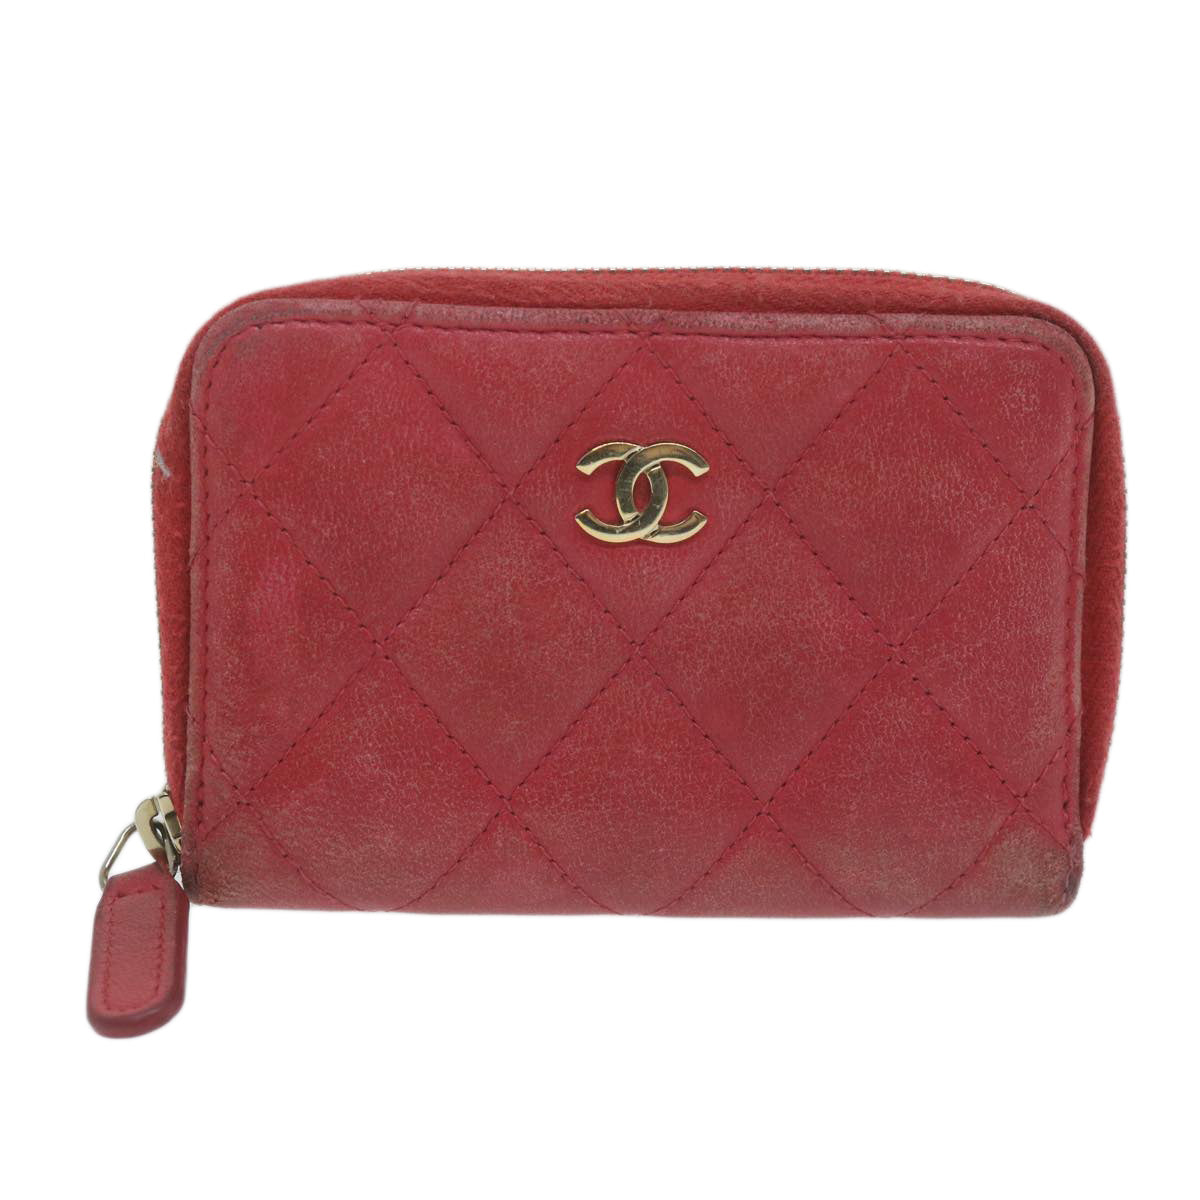 CHANEL Matelasse Coin Purse Lamb Skin Red CC Auth 65239